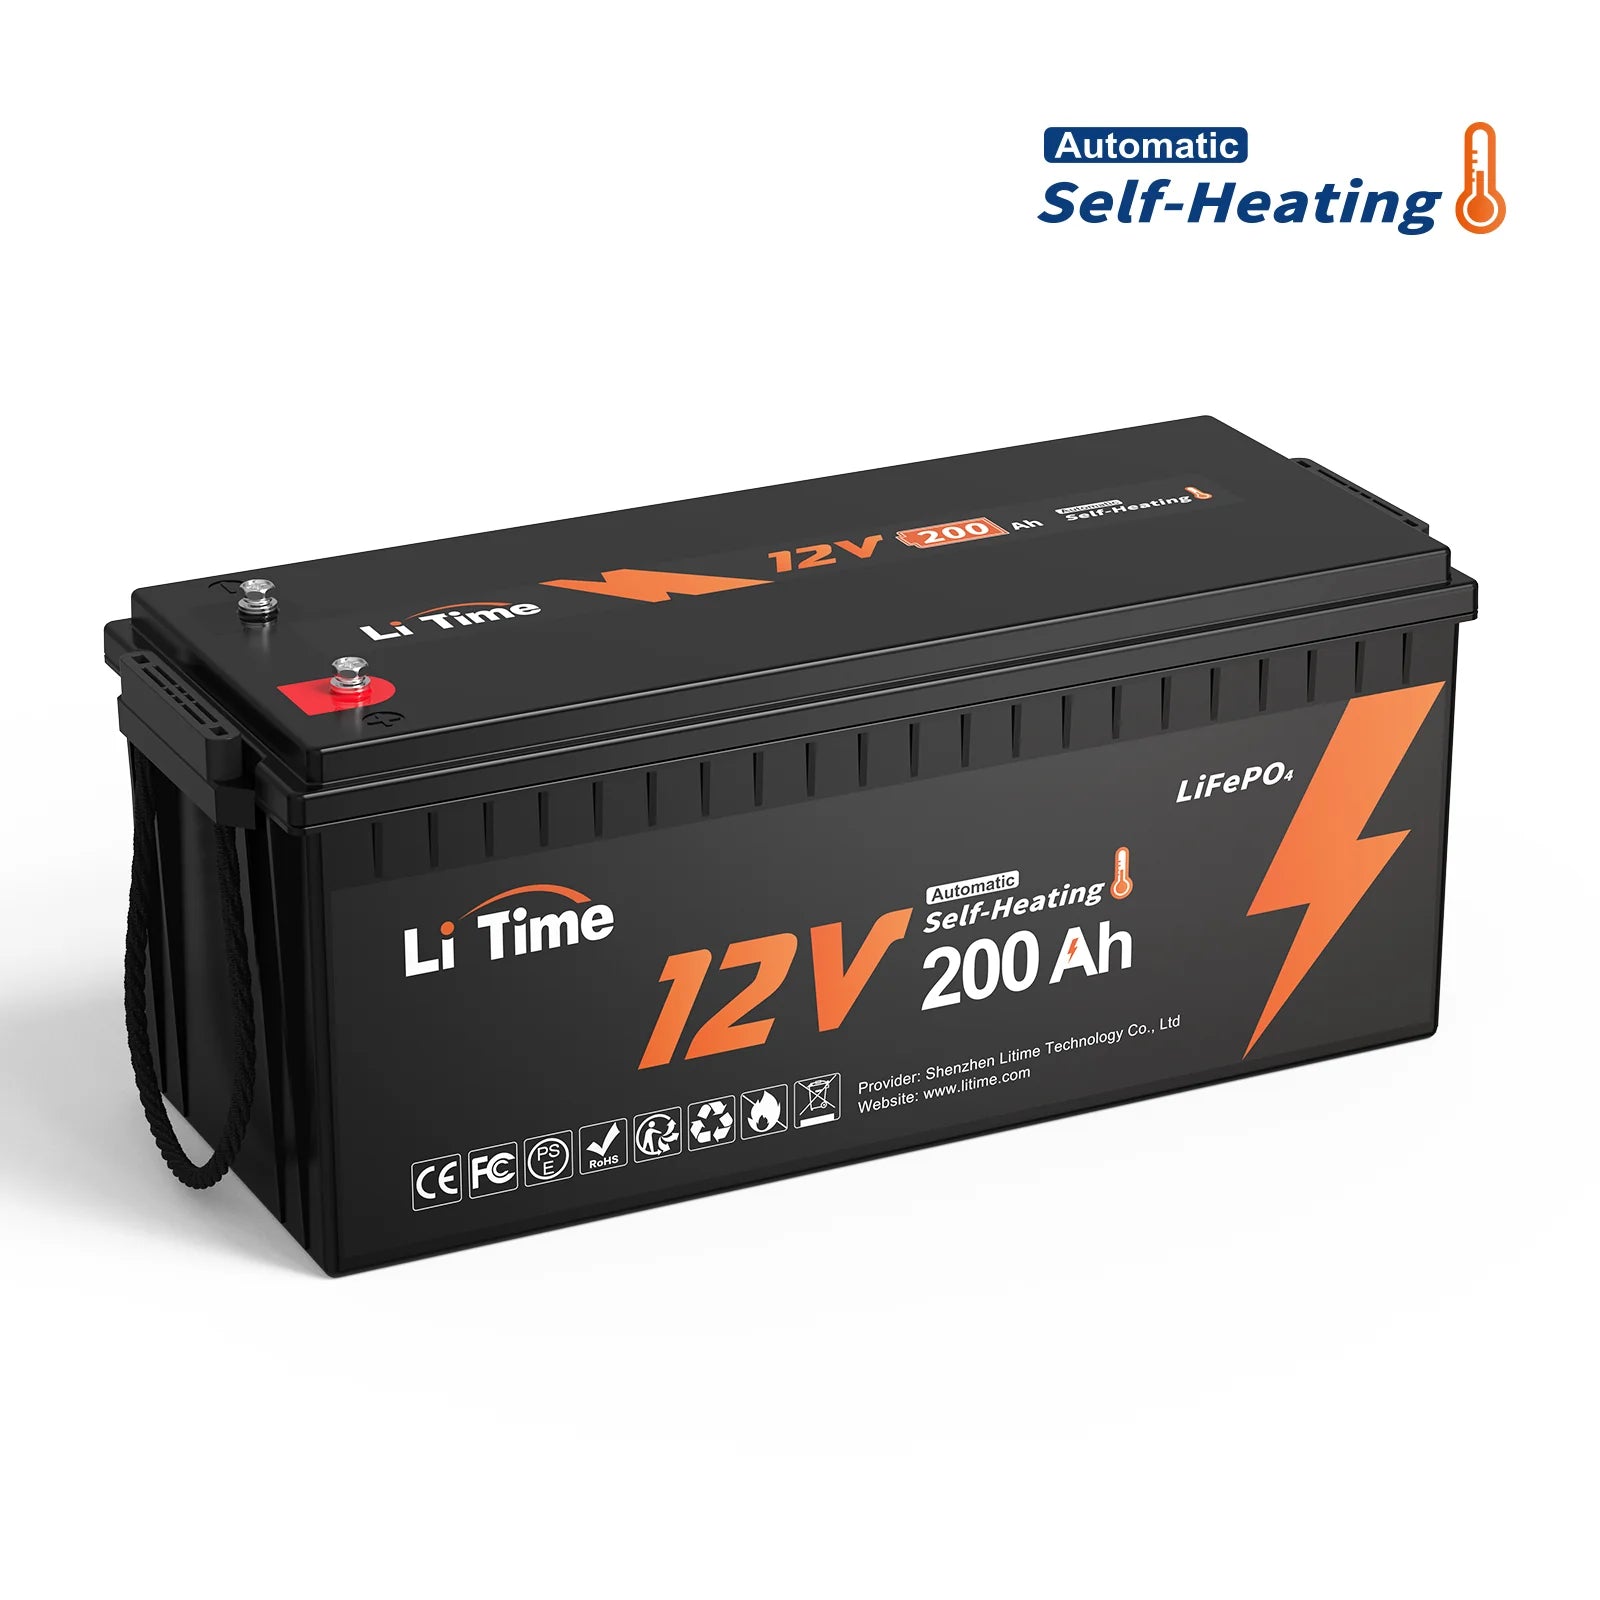 LiTime12V200AhSelf-HeatingLiFePO4LithiumBatterywith100ABMS_LowTemperatureProtection1.webp__PID:53a115c6-b28c-4523-a71e-50c06fa24acd